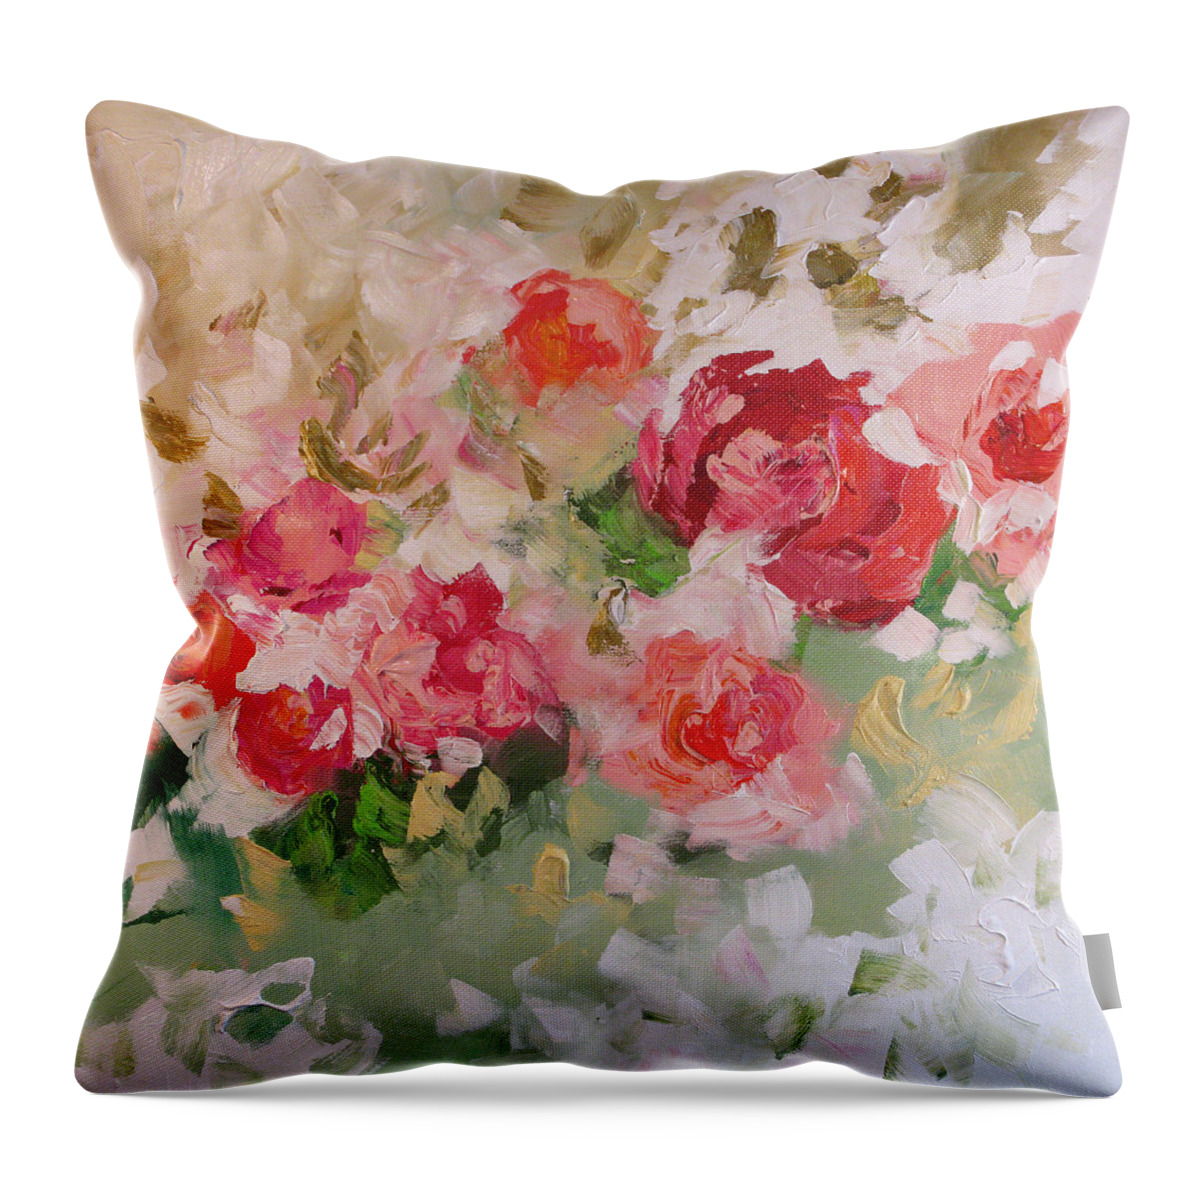 Art Throw Pillow featuring the painting Love Always by Linda Monfort